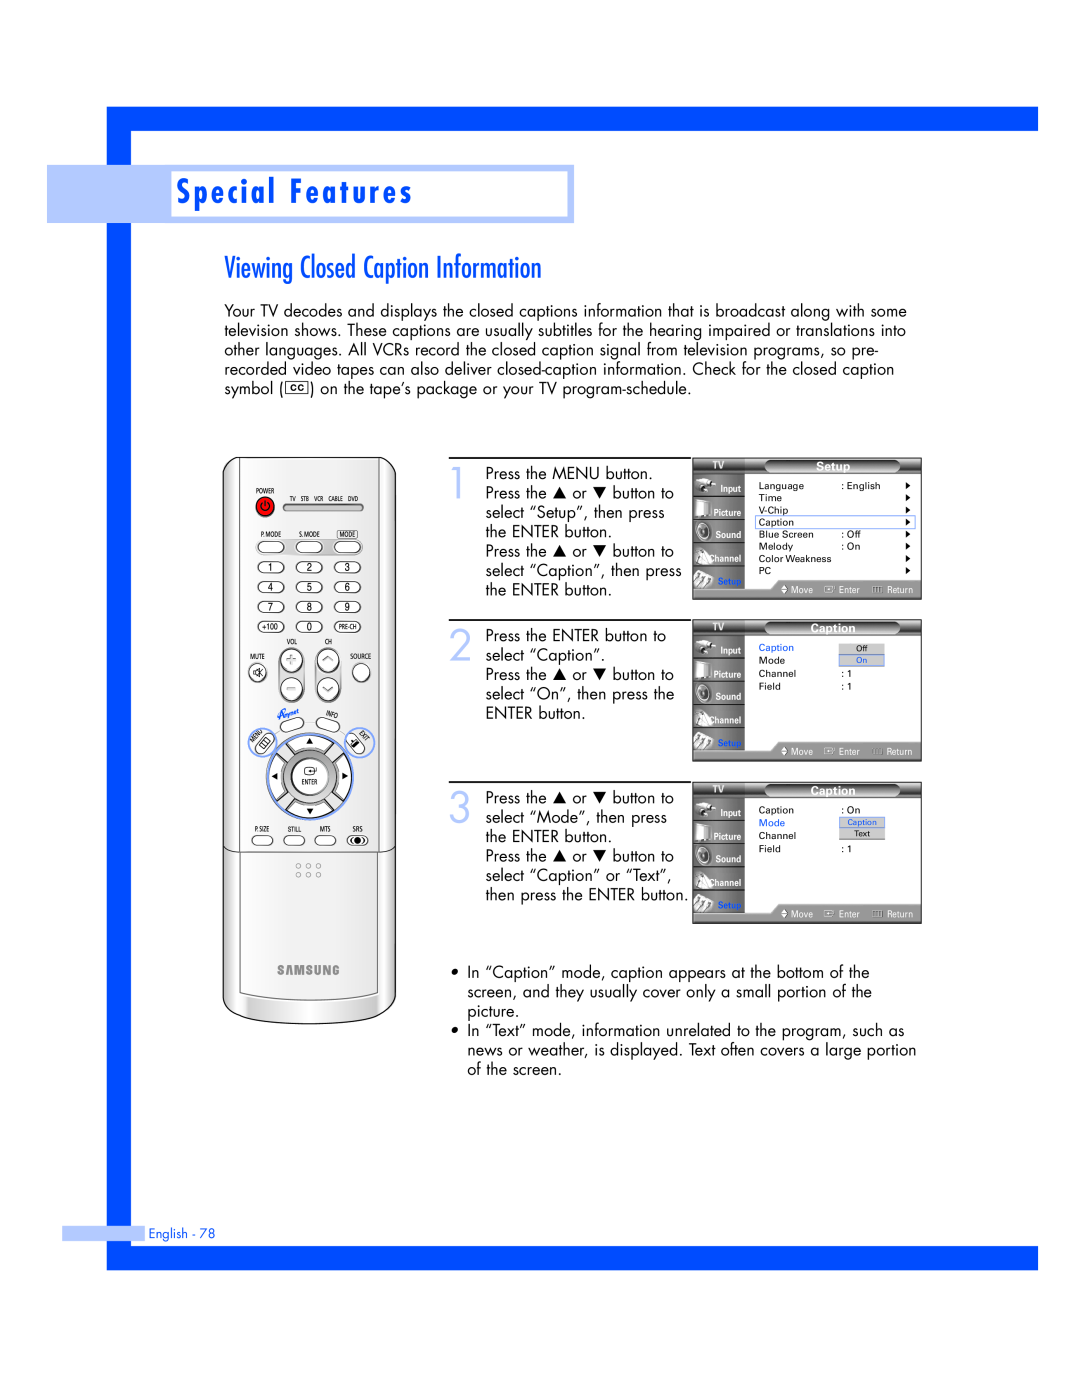 Samsung HL-P4674W instruction manual Viewing Closed Caption Information, Special Features 